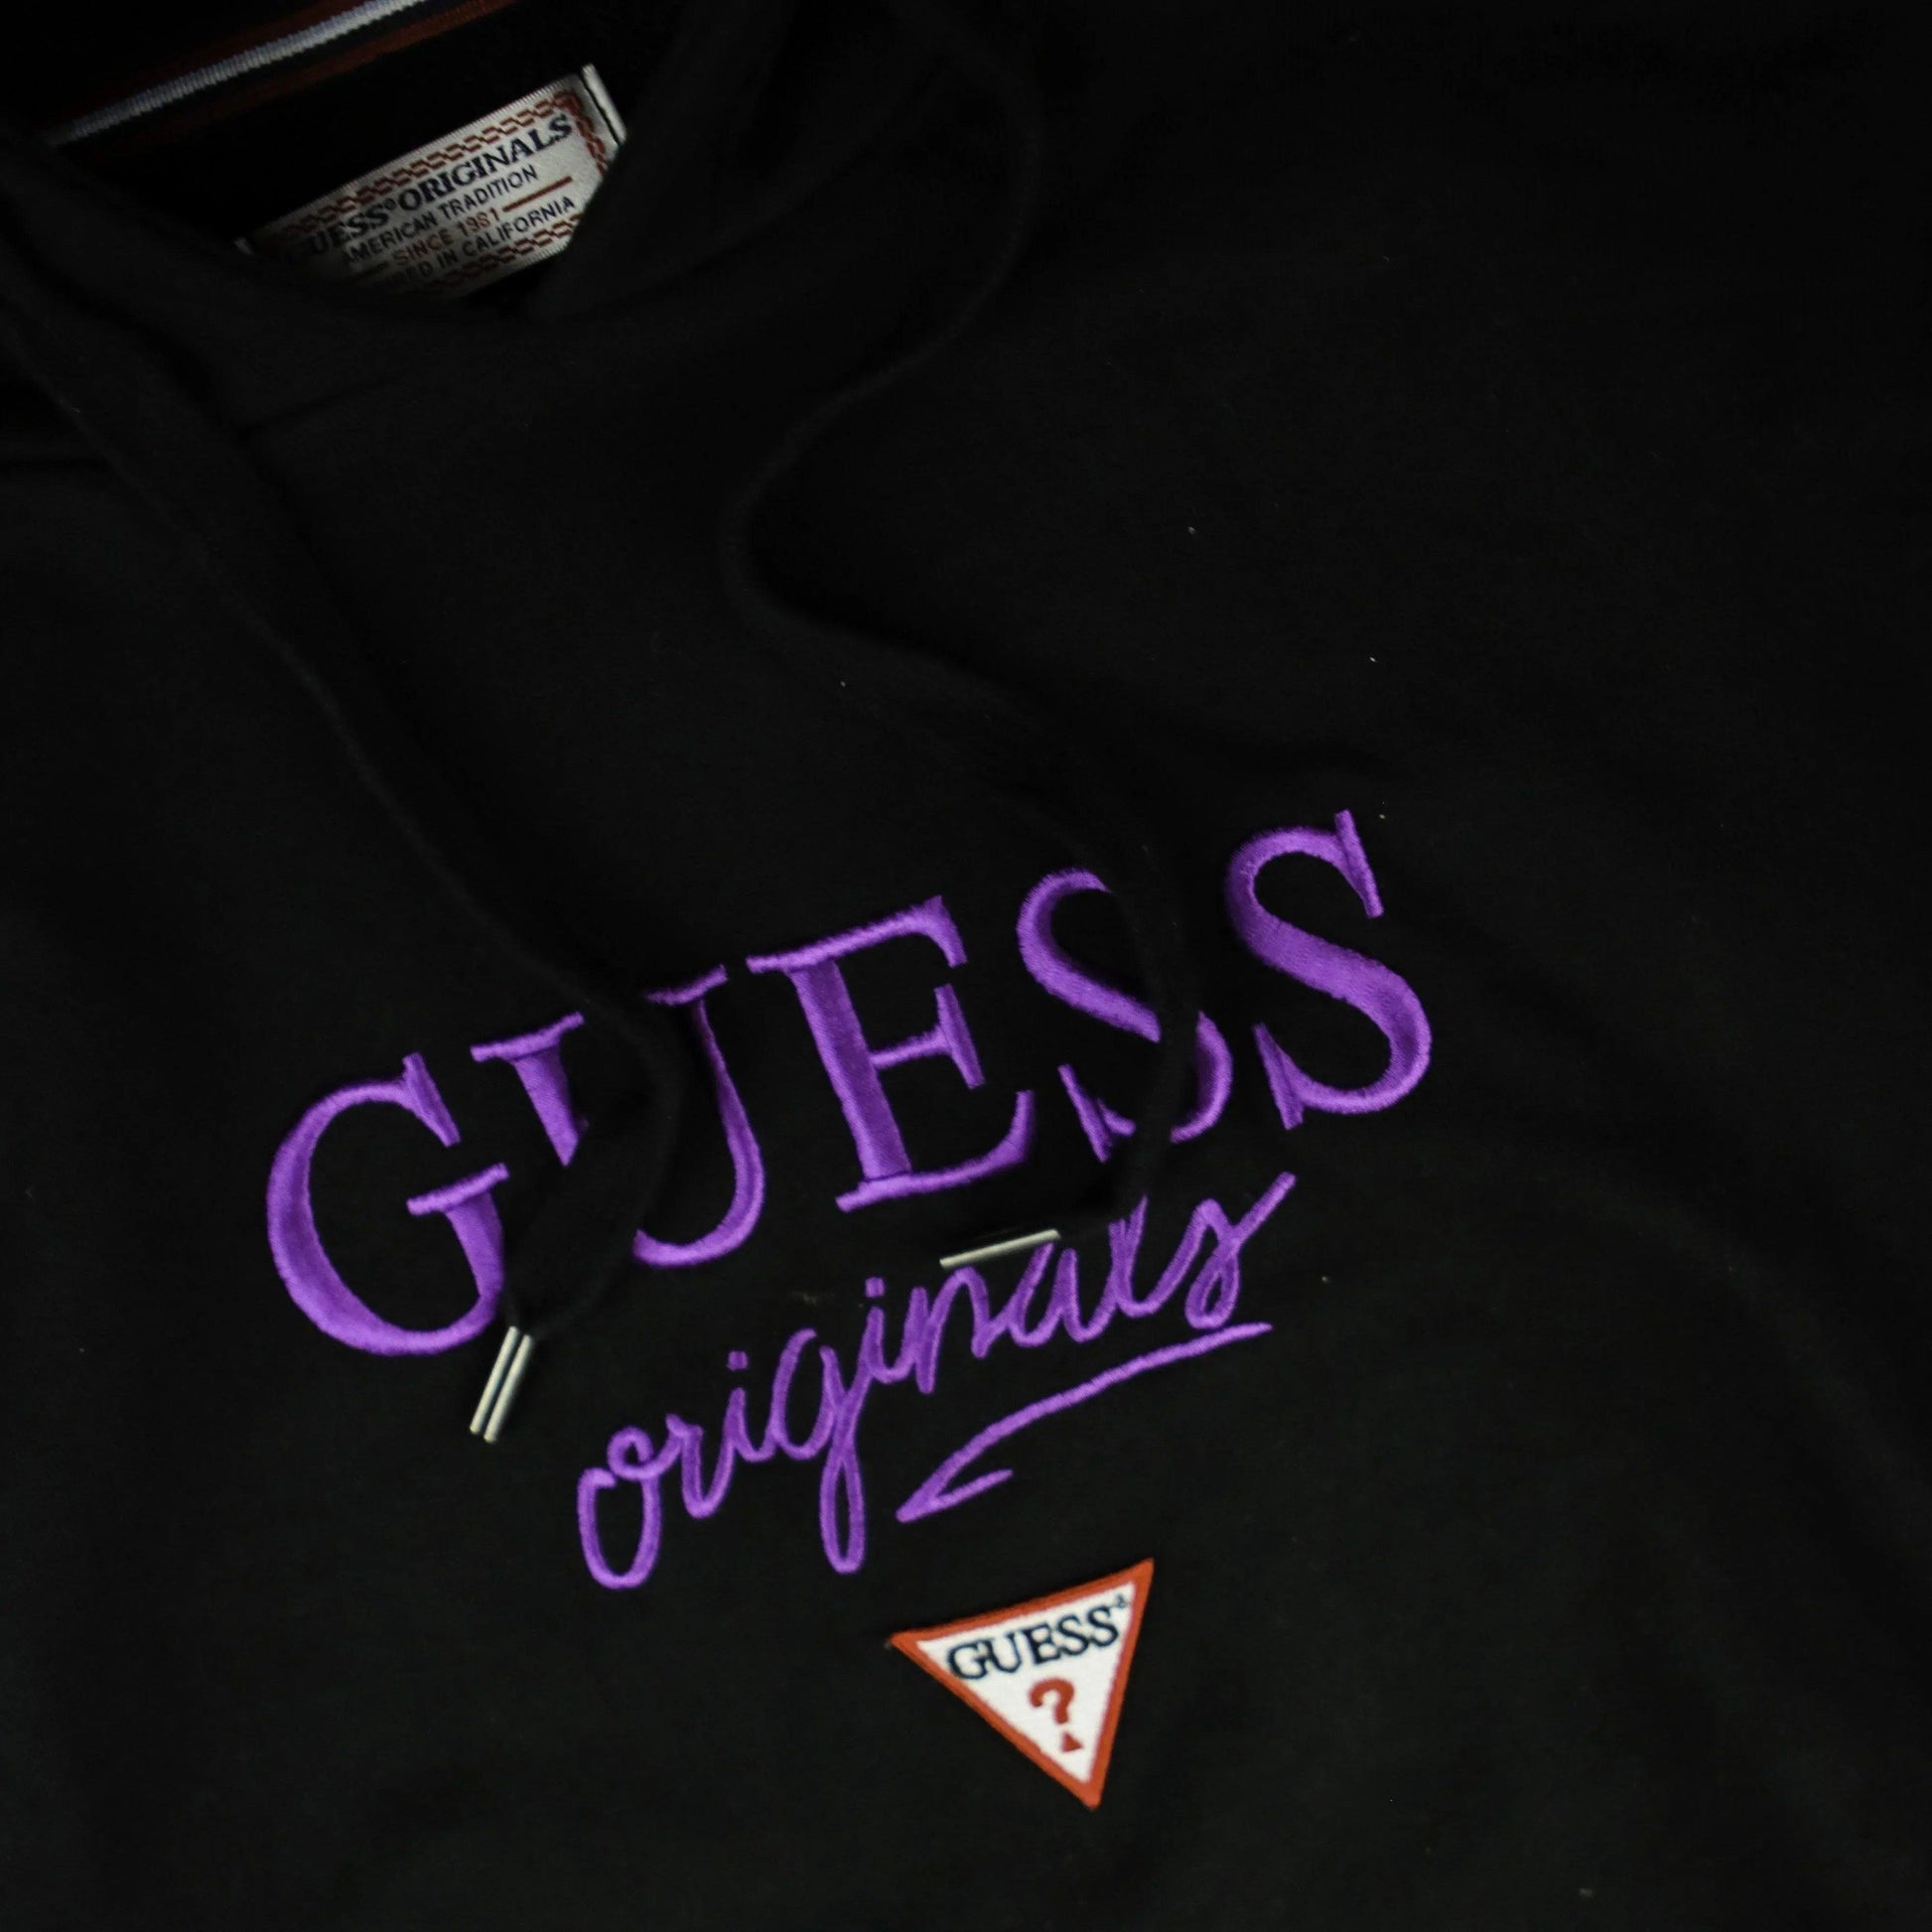 GUESS SCRIPT HOODY (L) - Known Source